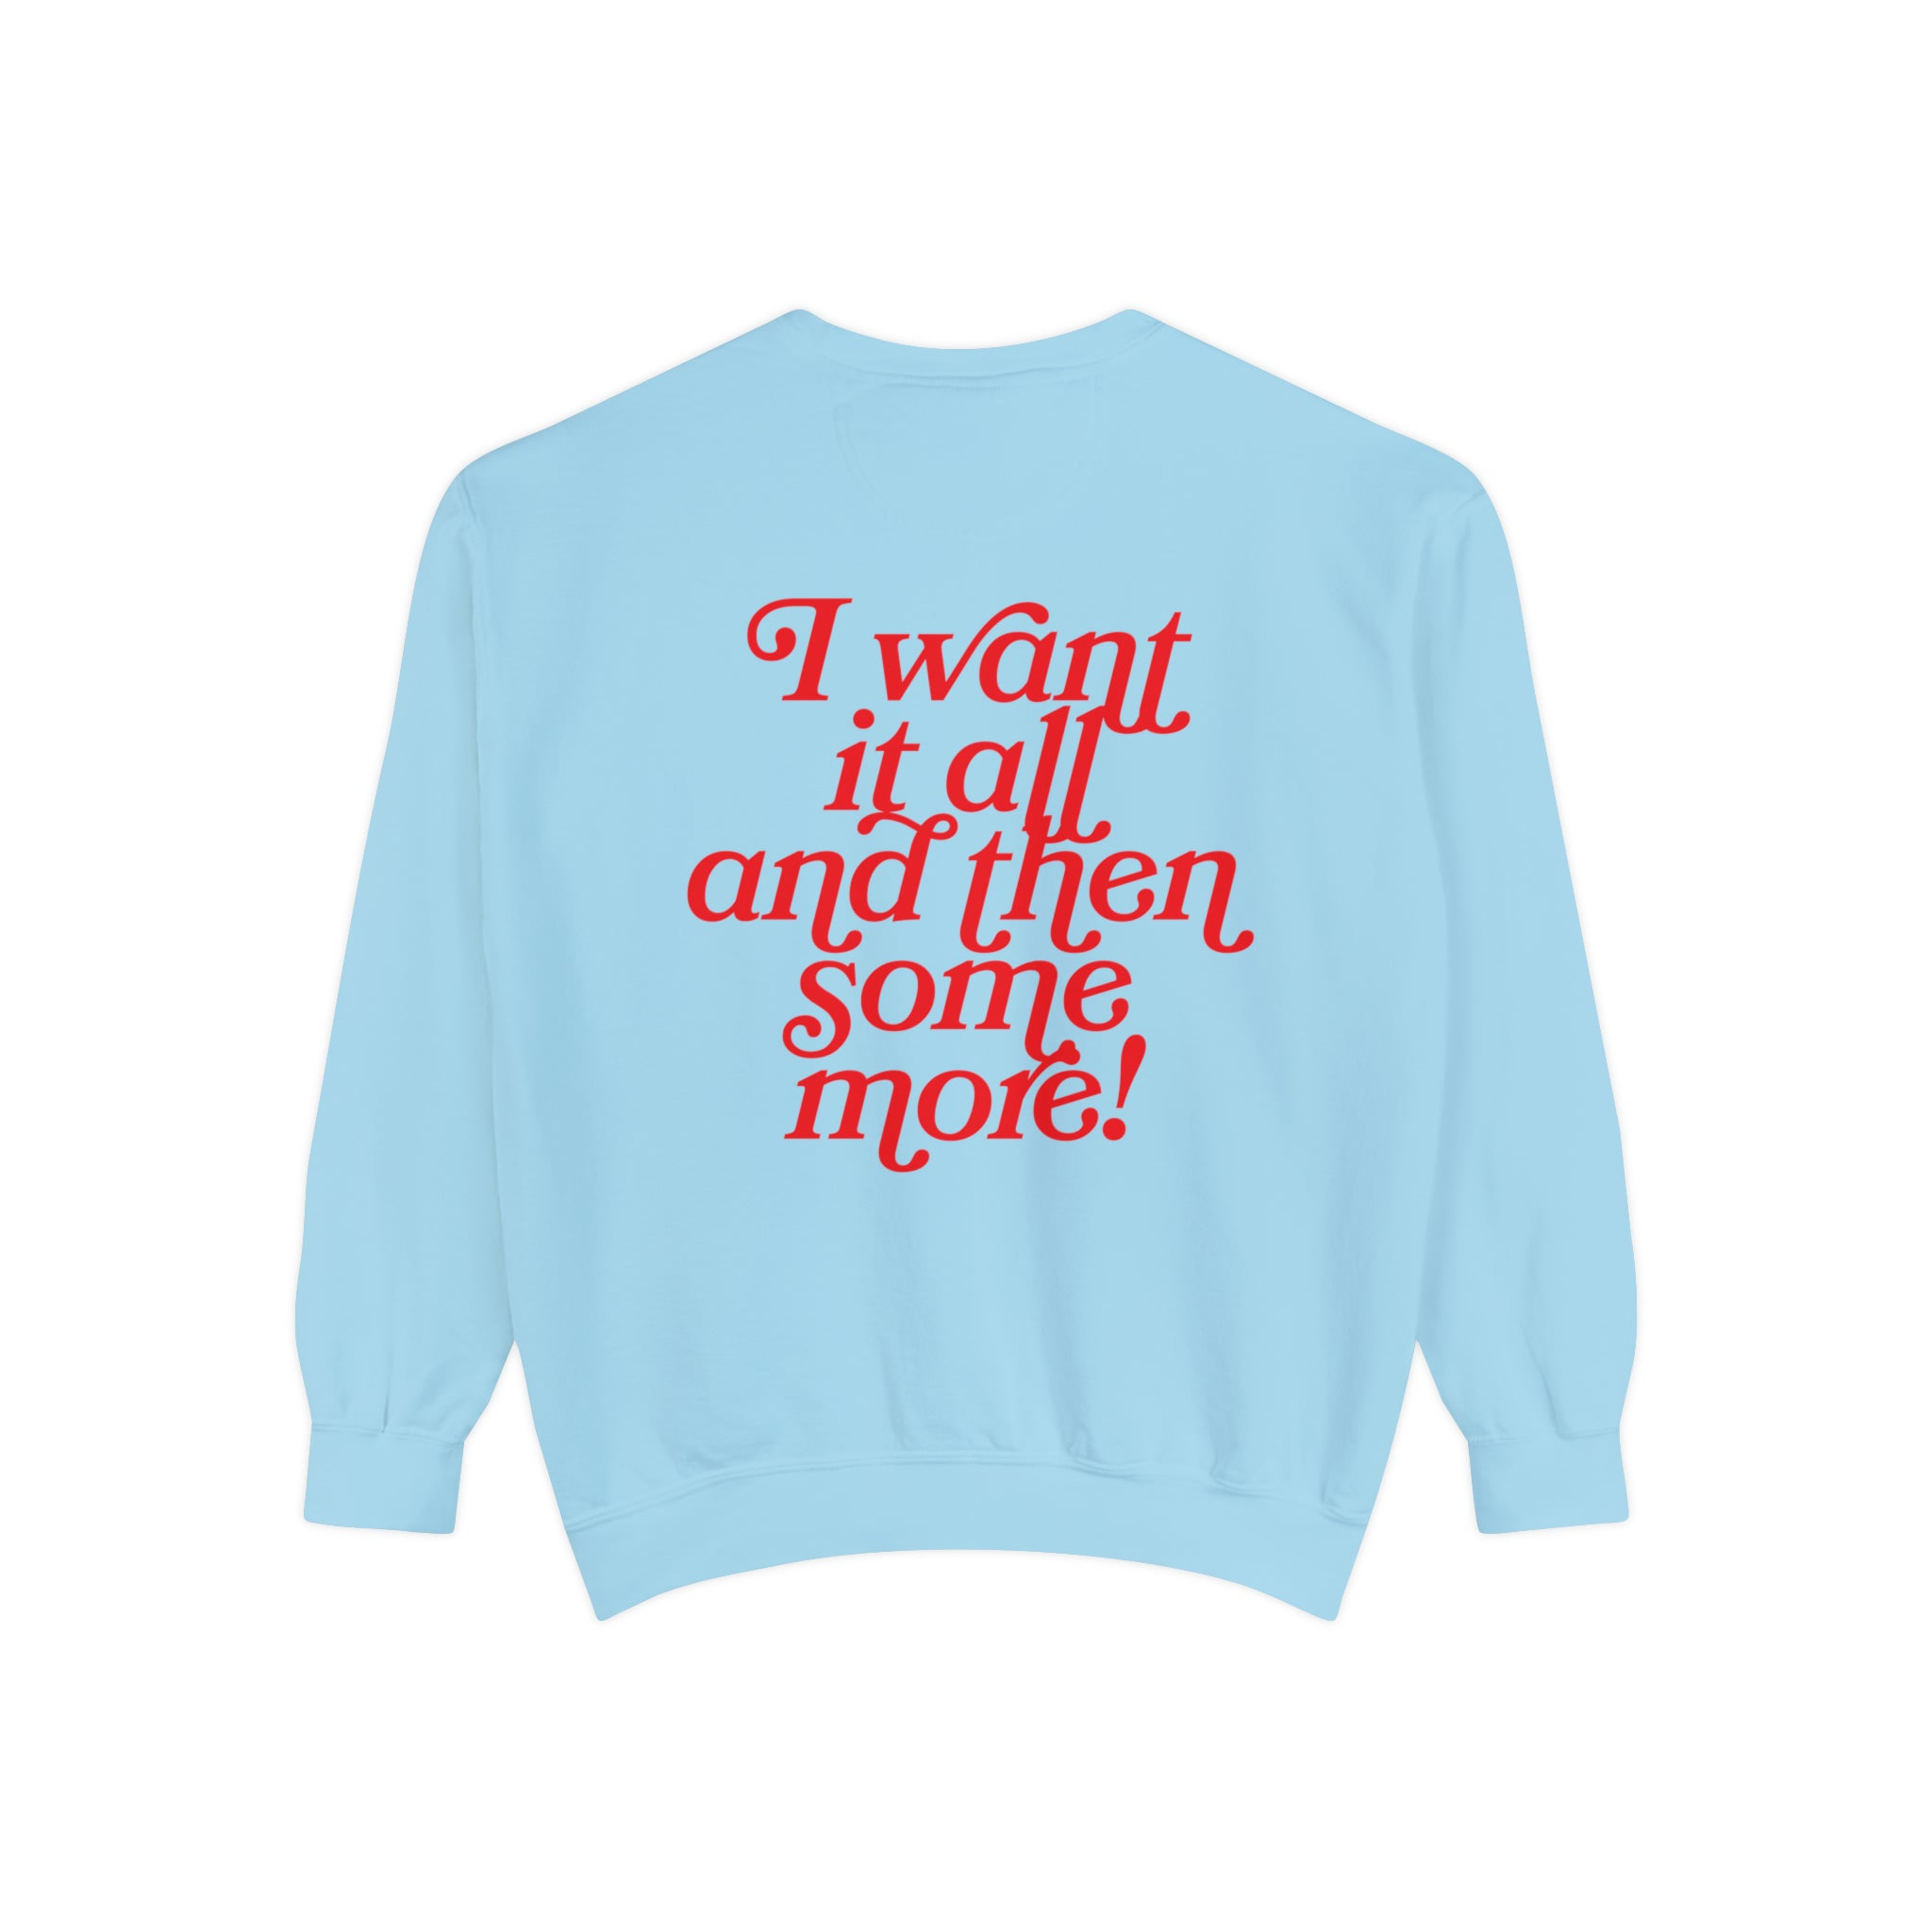 I Want It All And Then Some More Comfort Colors Crewneck Sweatshirt